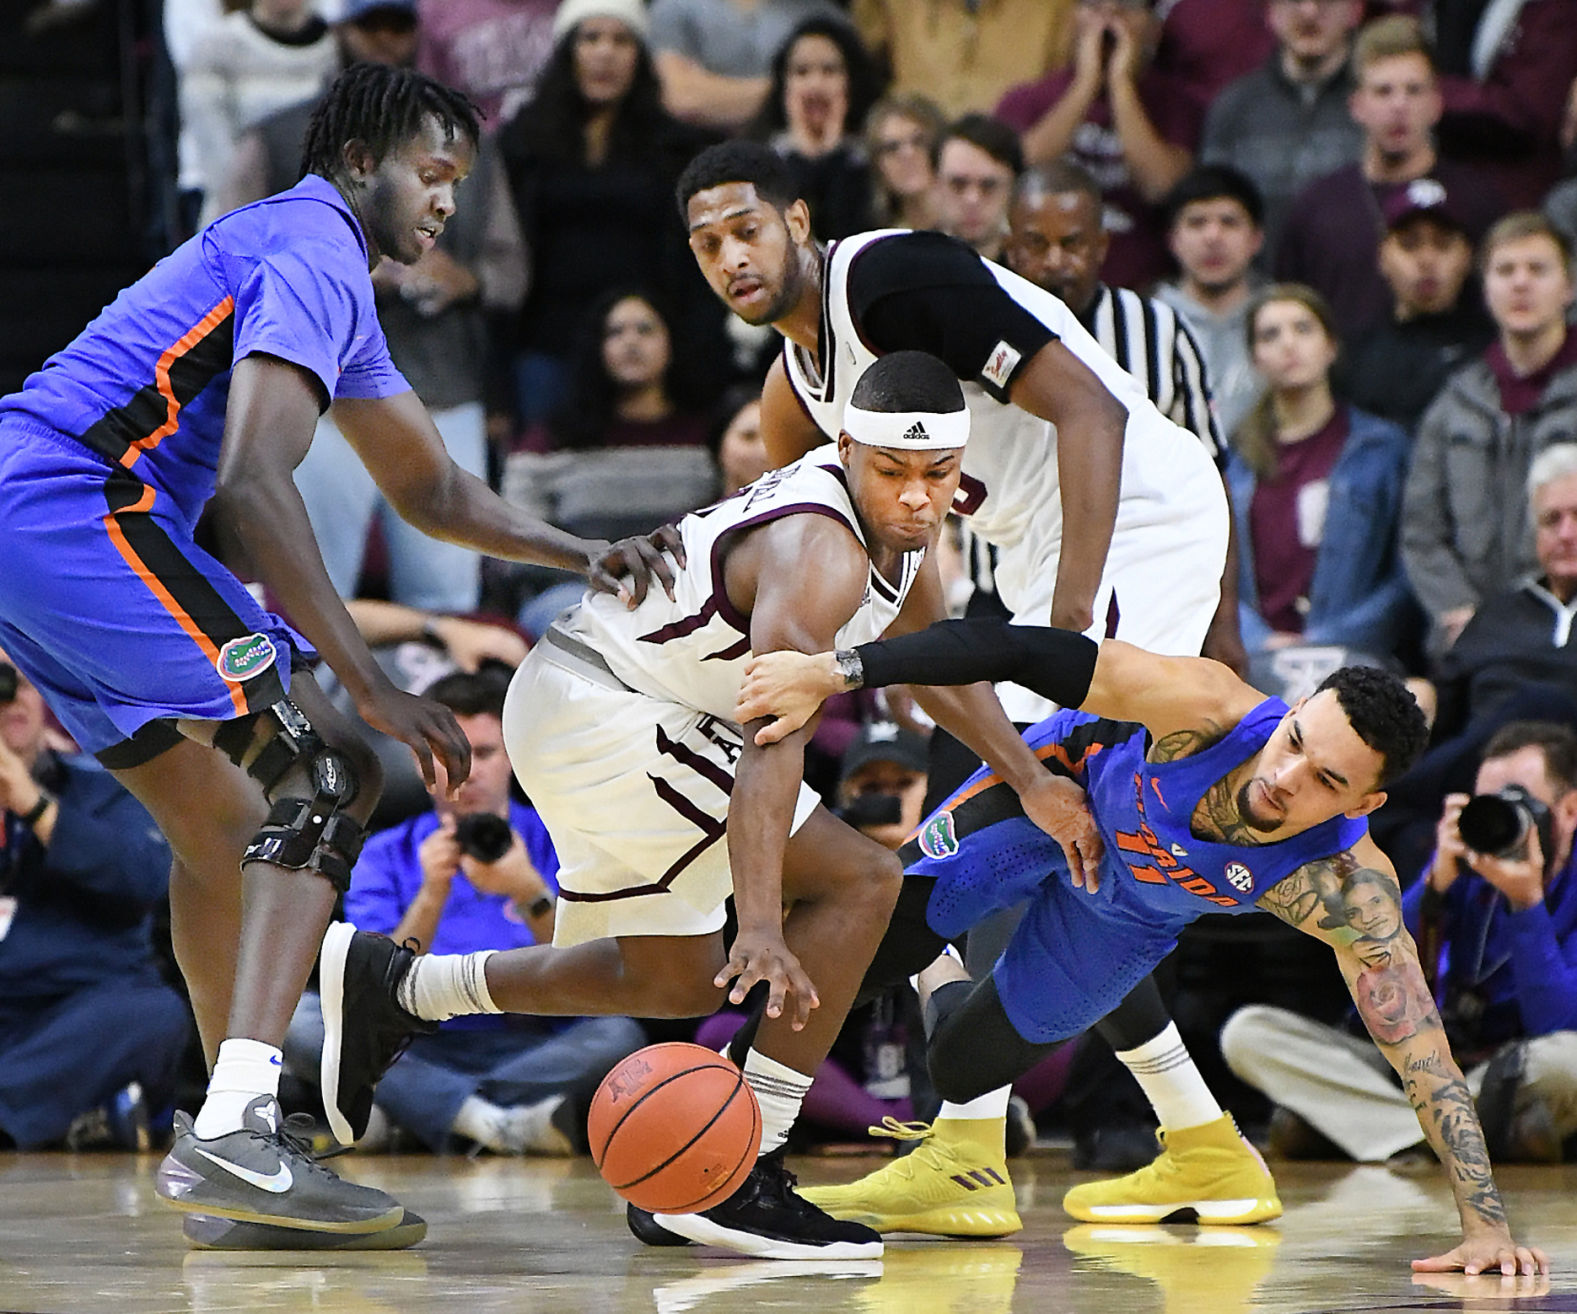 No. 11 Texas A&M men's basketball team loses second straight to open